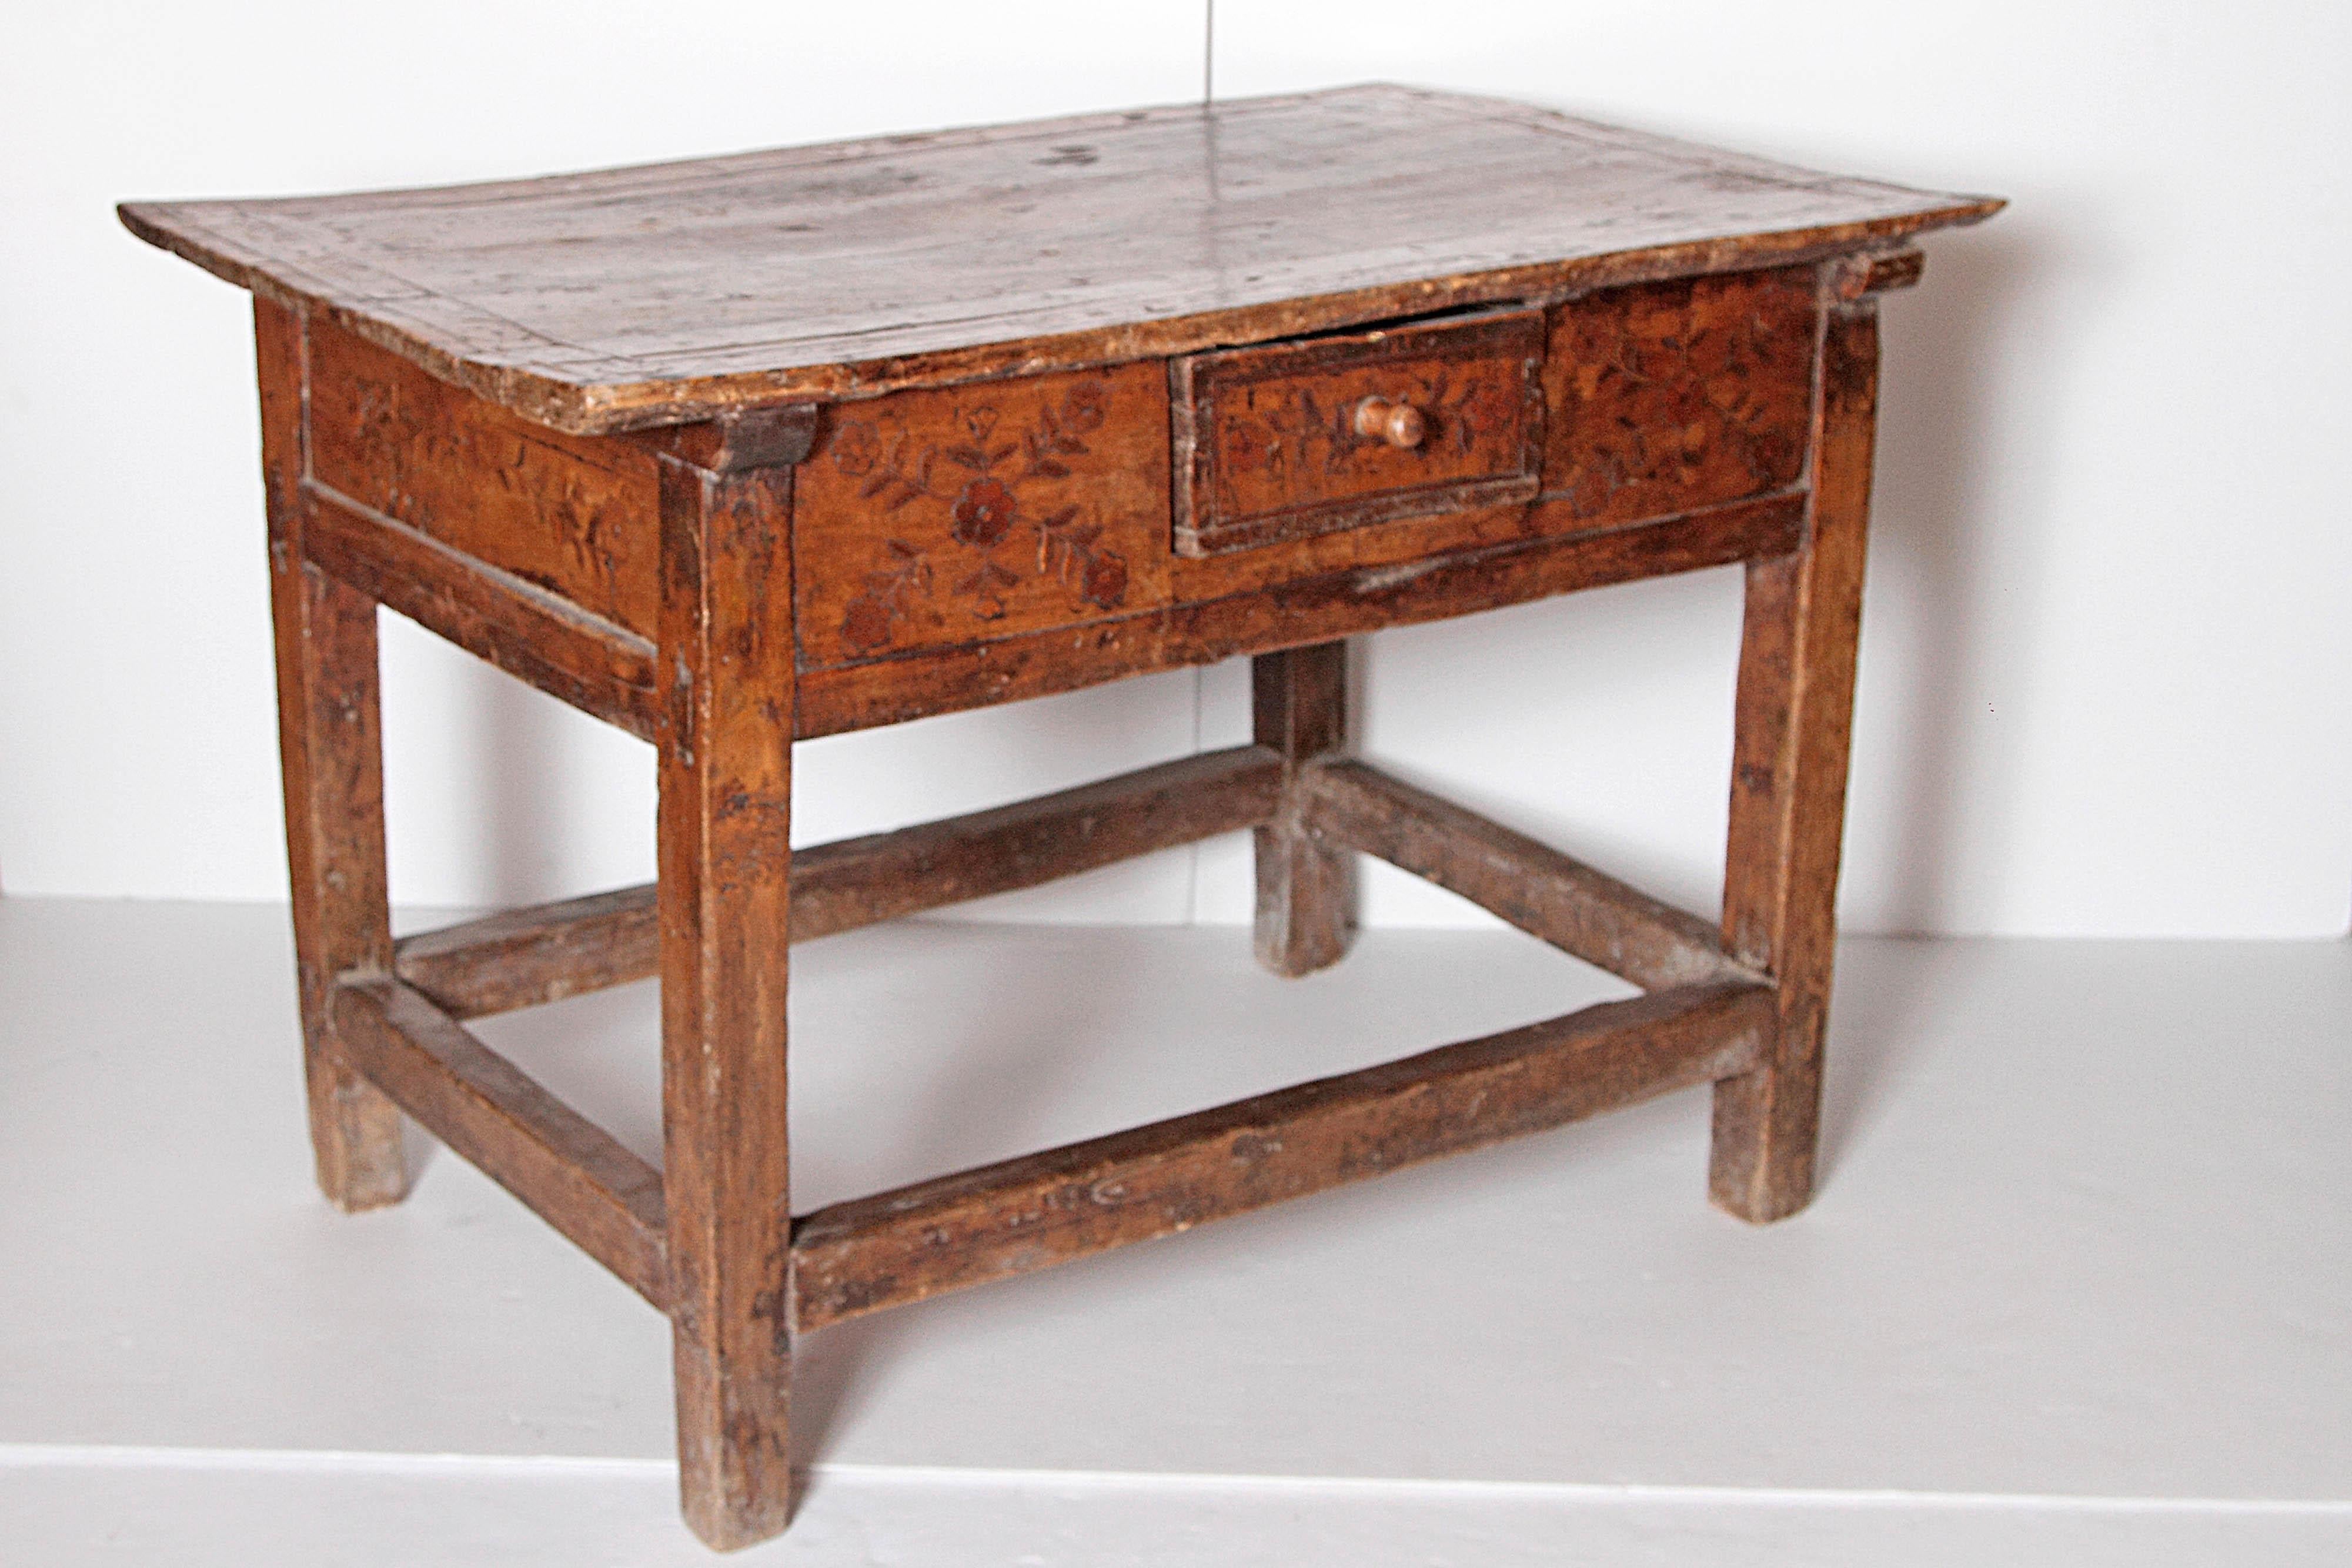 Hand-Carved 18th Century Spanish Colonial Table from Columbia